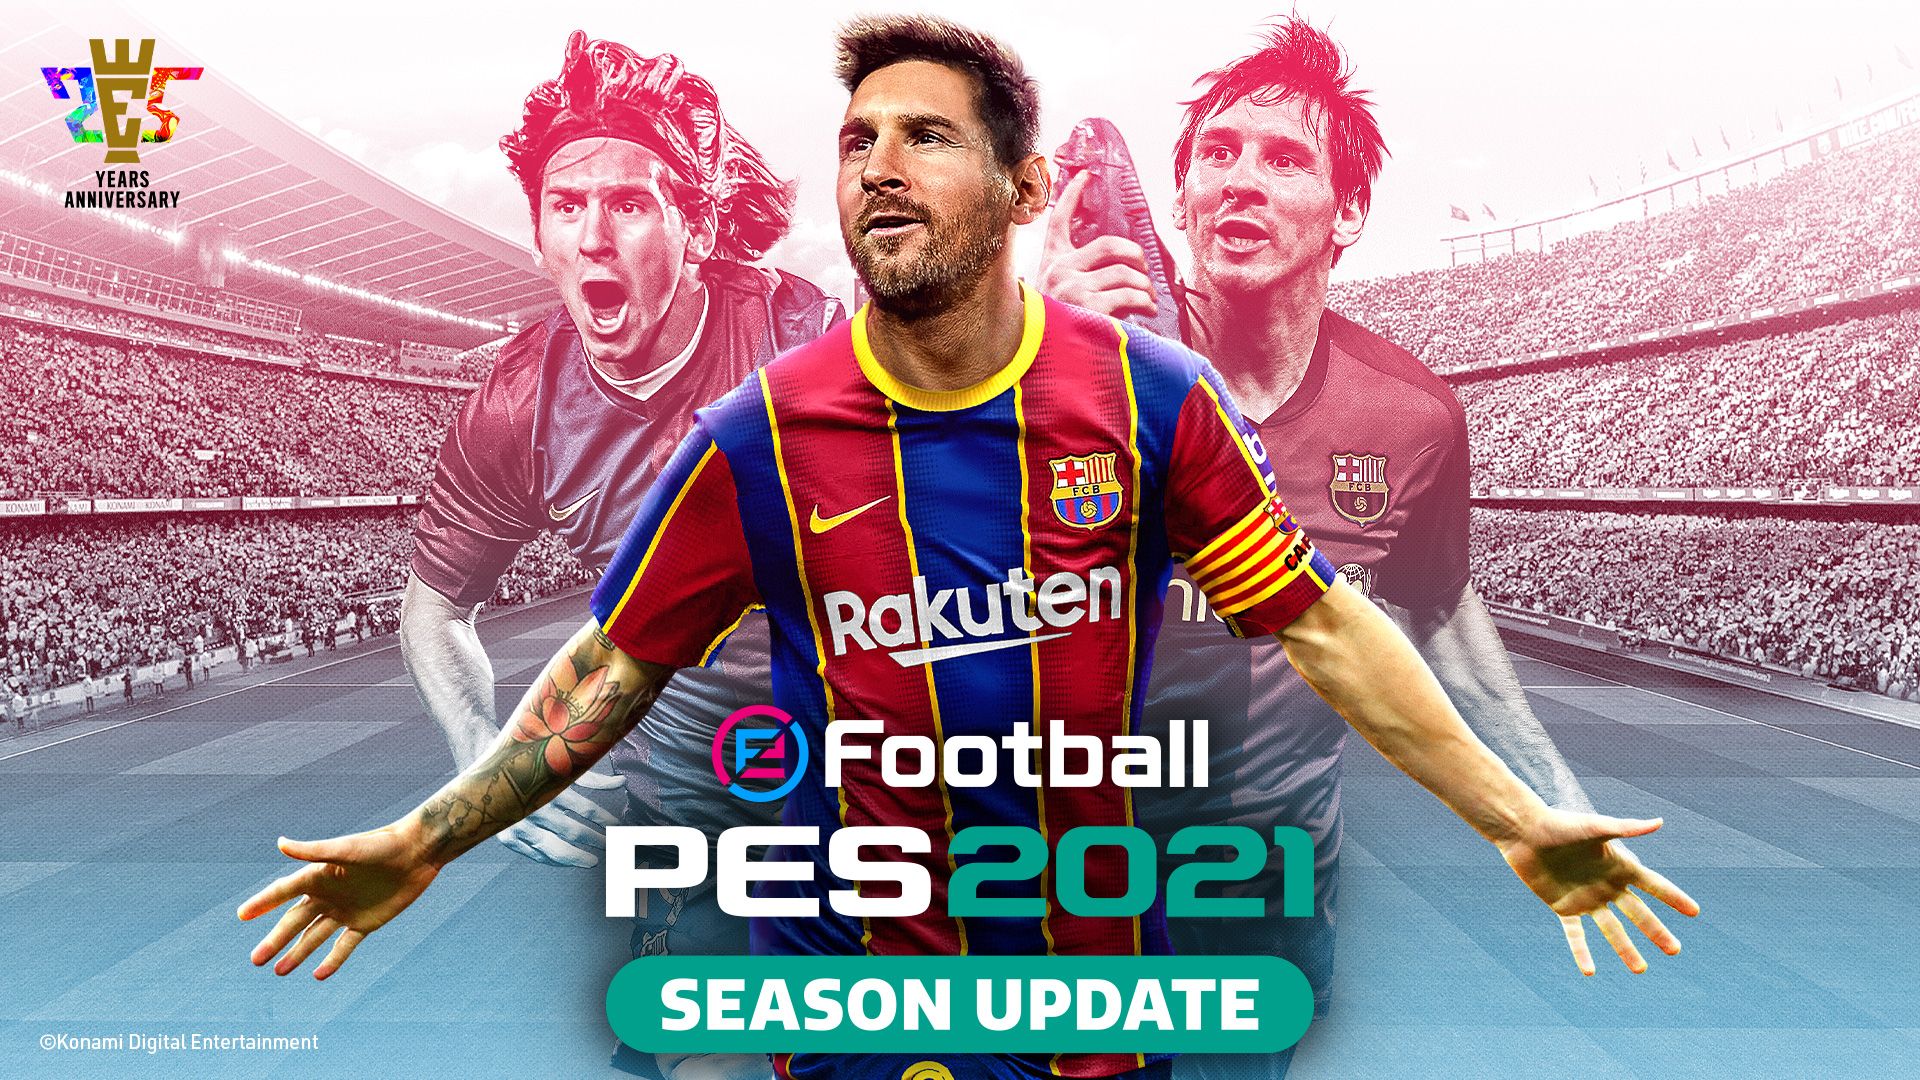 KONAMI ANNOUNCES eFootball PES 2021 SEASON UPDATE, AVAILABLE FROM